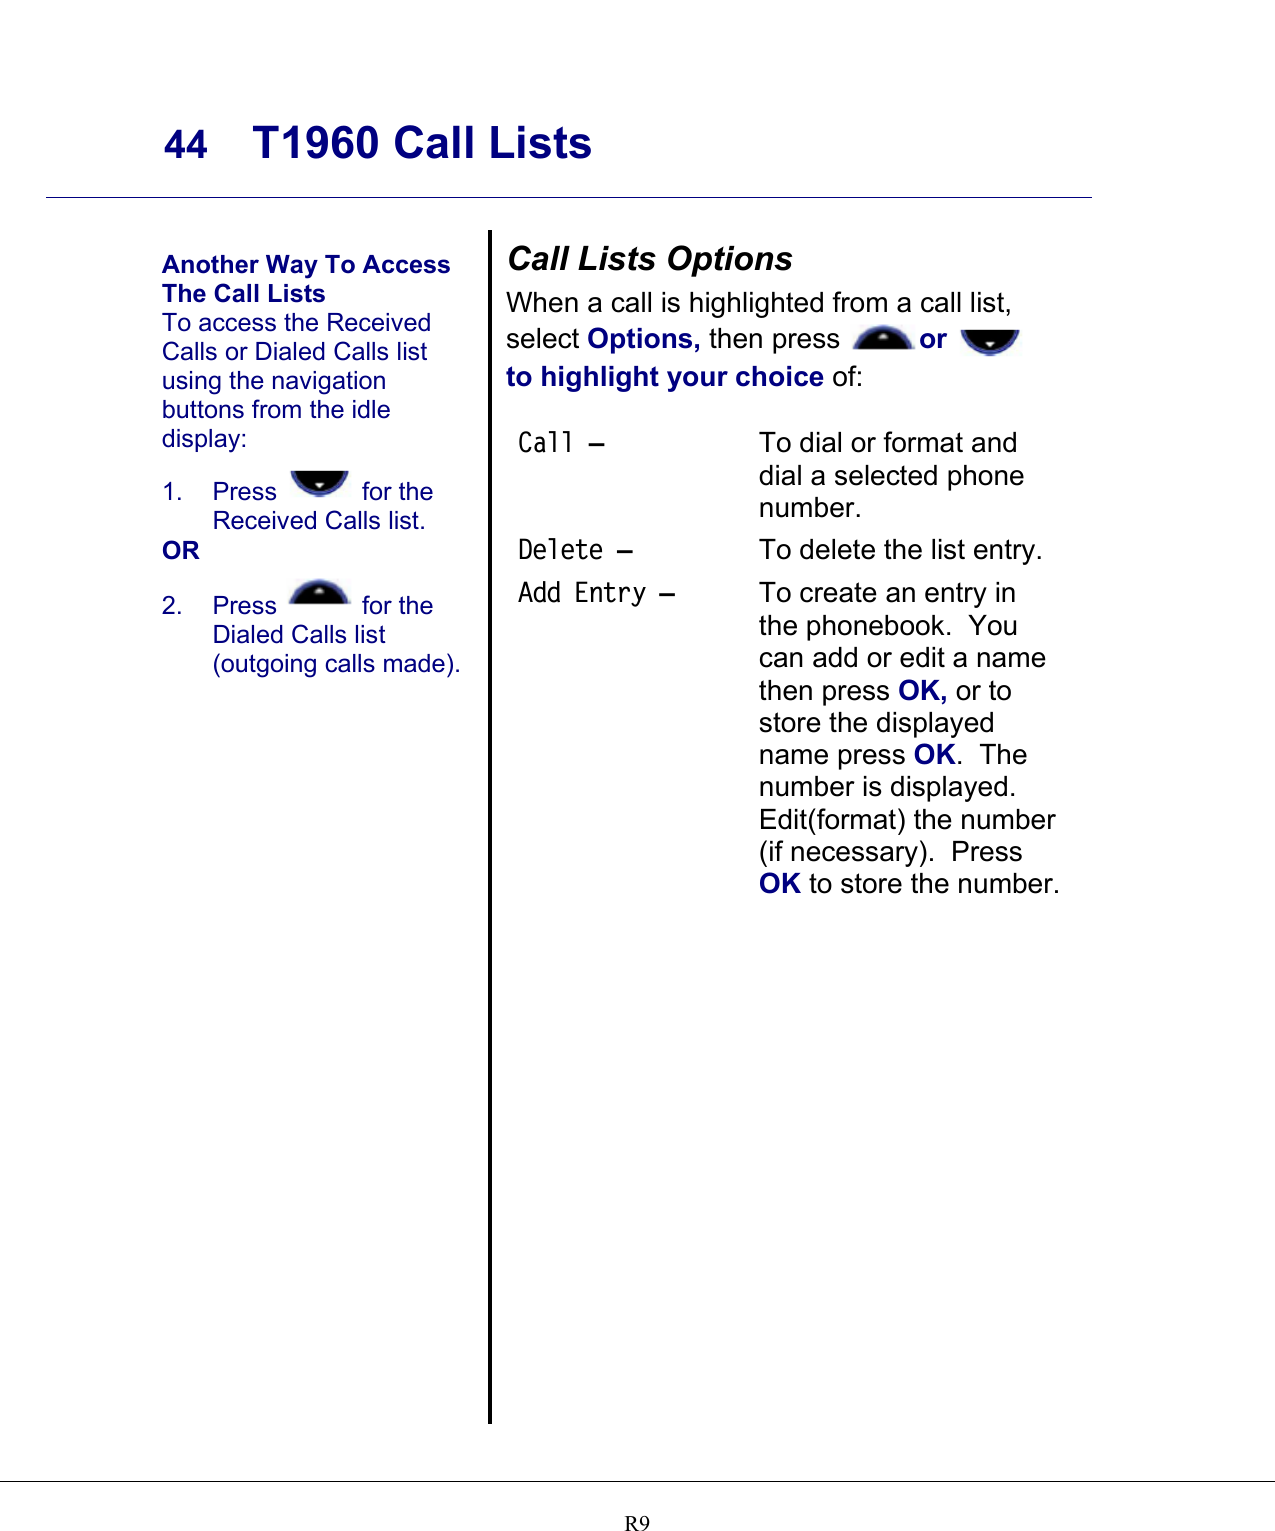     44 T1960 Call Lists    R9  Another Way To Access The Call Lists To access the Received Calls or Dialed Calls list using the navigation buttons from the idle display: 1. Press   for the Received Calls list. OR 2. Press   for the Dialed Calls list (outgoing calls made).  Call Lists Options When a call is highlighted from a call list, select Options, then press or    to highlight your choice of:  Call – To dial or format and dial a selected phone number. Delete –  To delete the list entry. Add Entry –  To create an entry in the phonebook.  You can add or edit a name then press OK, or to store the displayed name press OK.  The number is displayed.  Edit(format) the number (if necessary).  Press OK to store the number.  